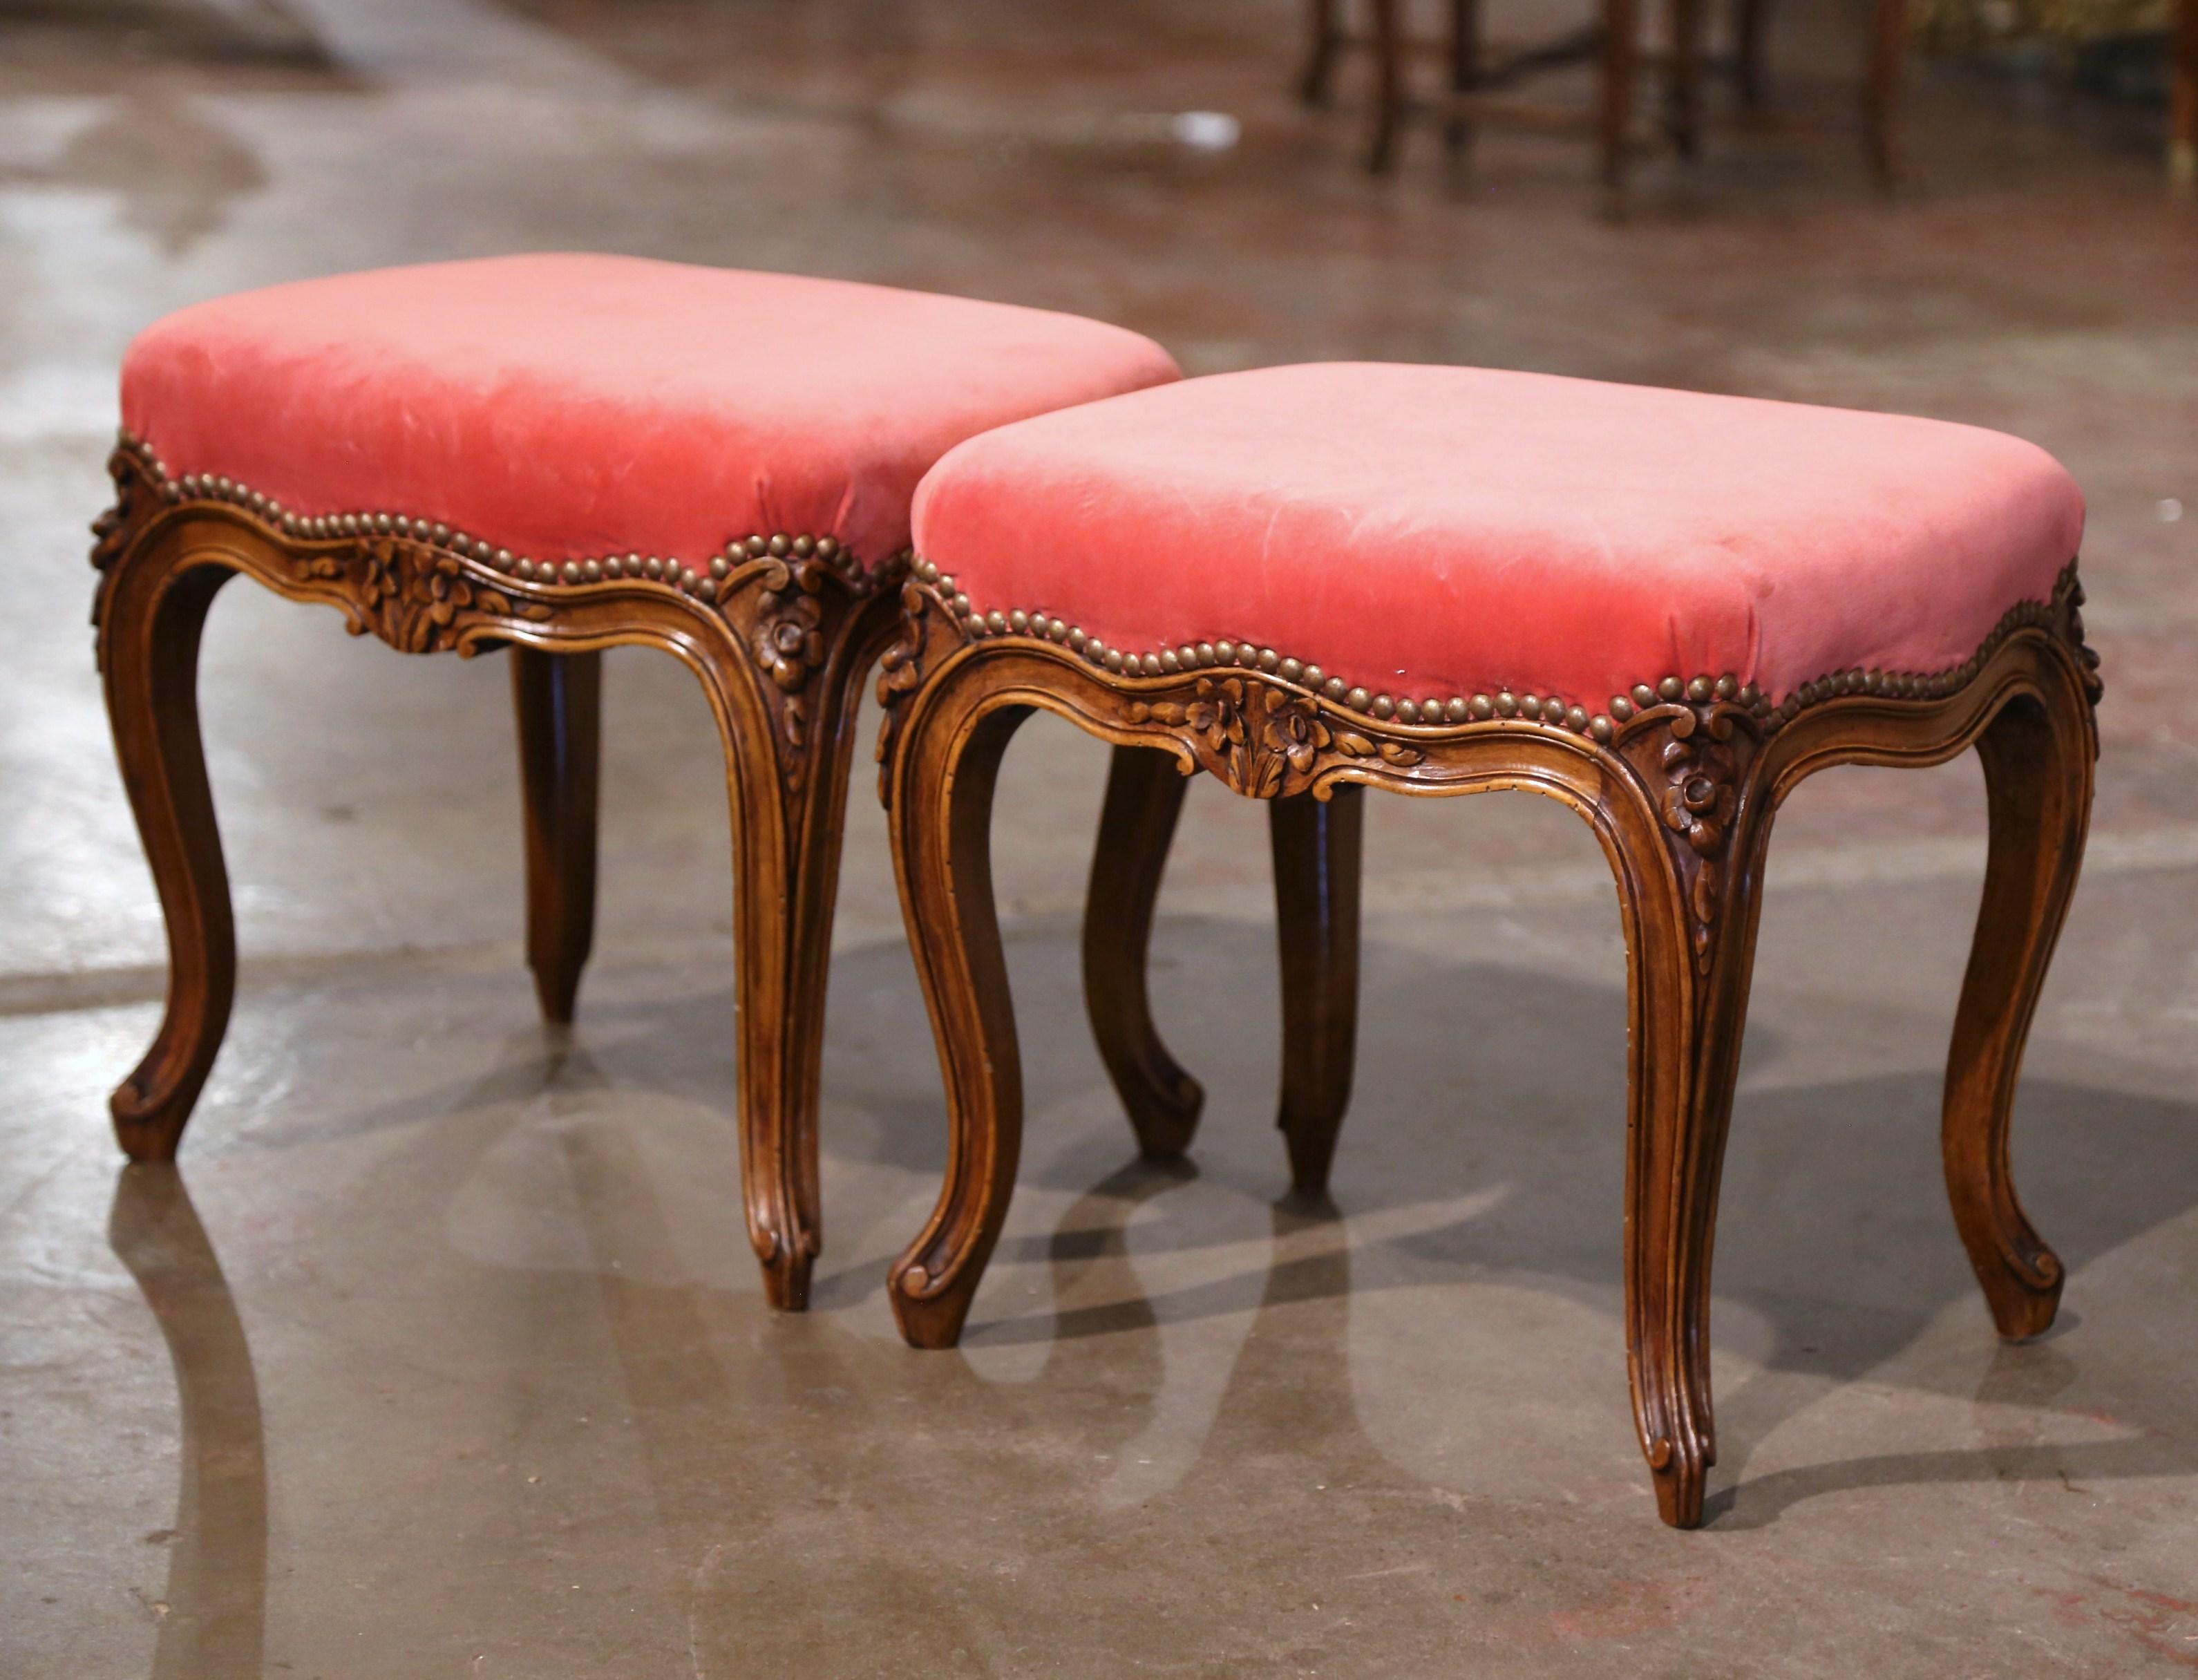 These elegant antique stools were crafted in Provence, France circa 1950. Standing on cabriole legs ending with scroll feet and decorated with carved leaf and floral motifs at the shoulder, each stool features a bombe scalloped apron embellished